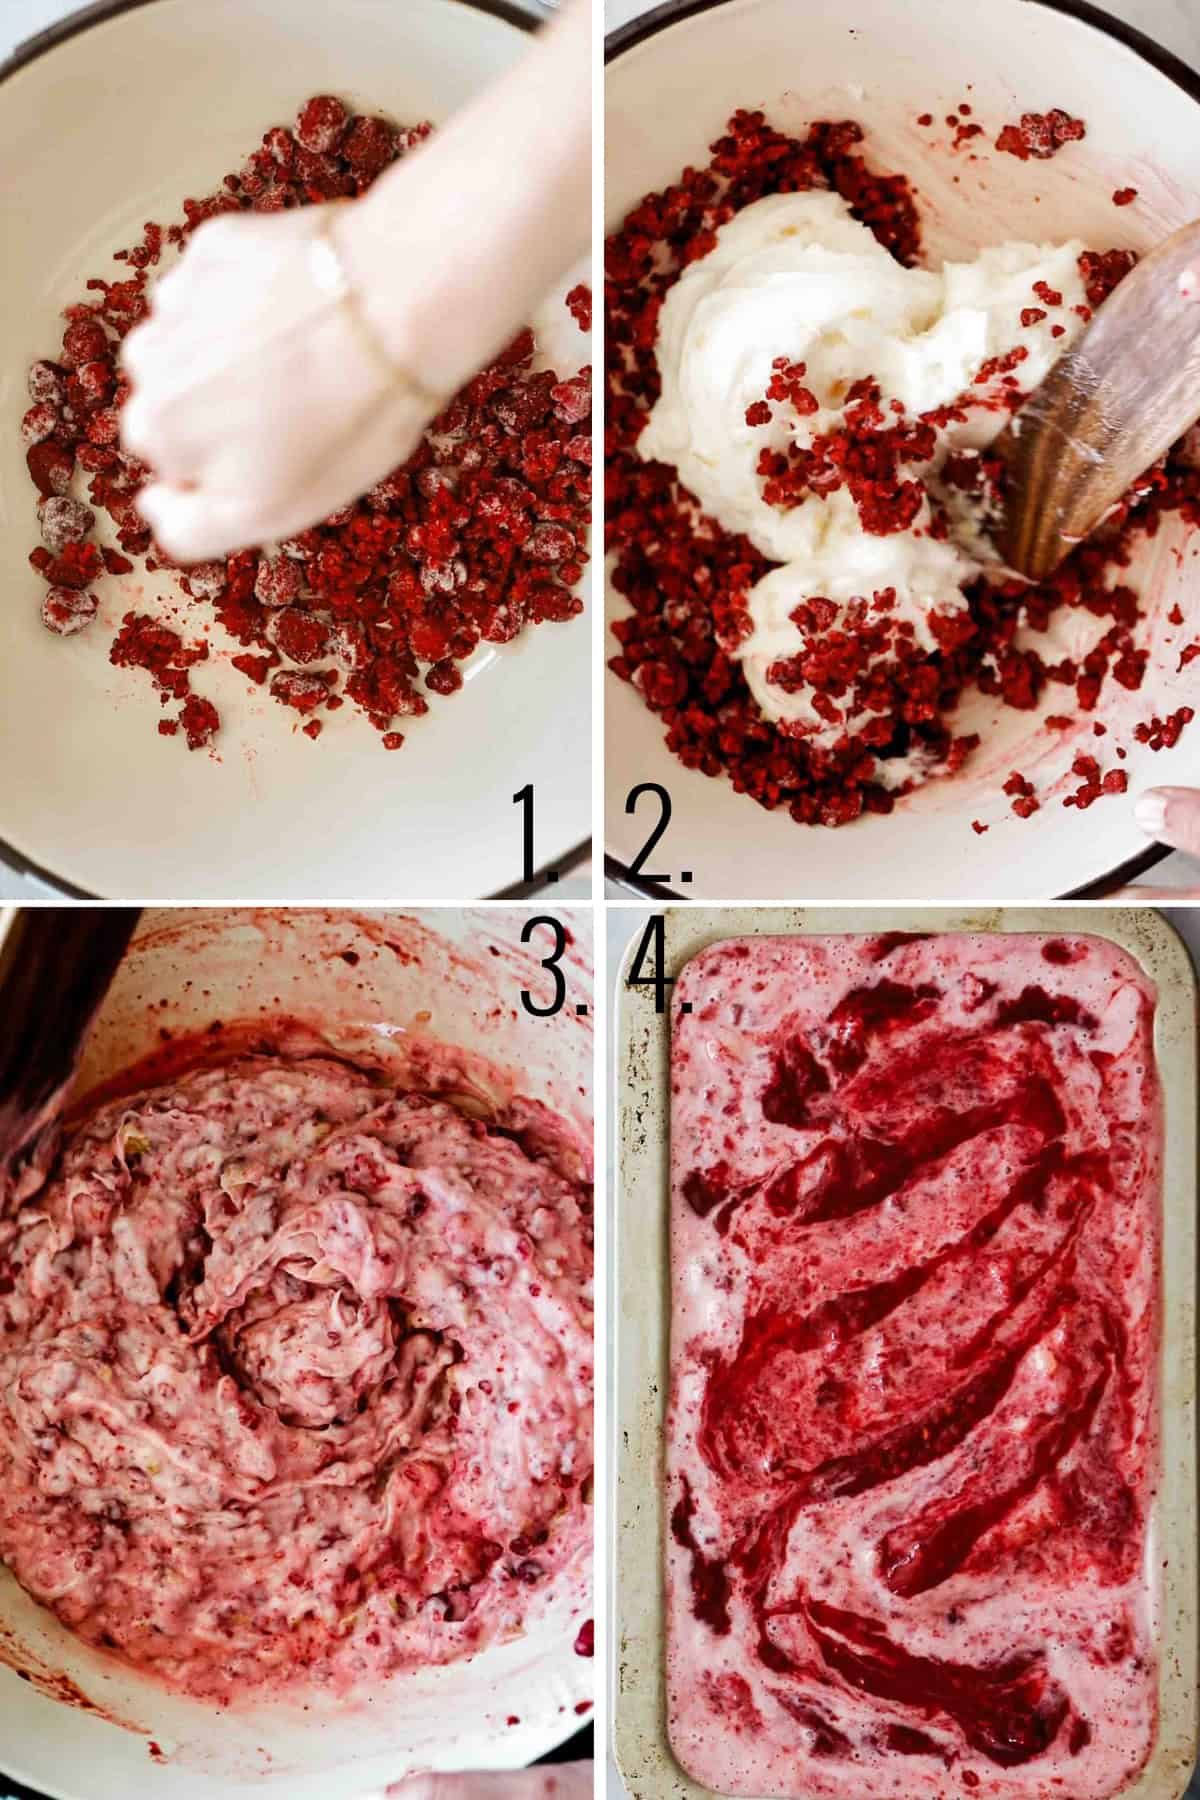 A collage of images showing the steps for mixing up homemade raspberry sherbet.